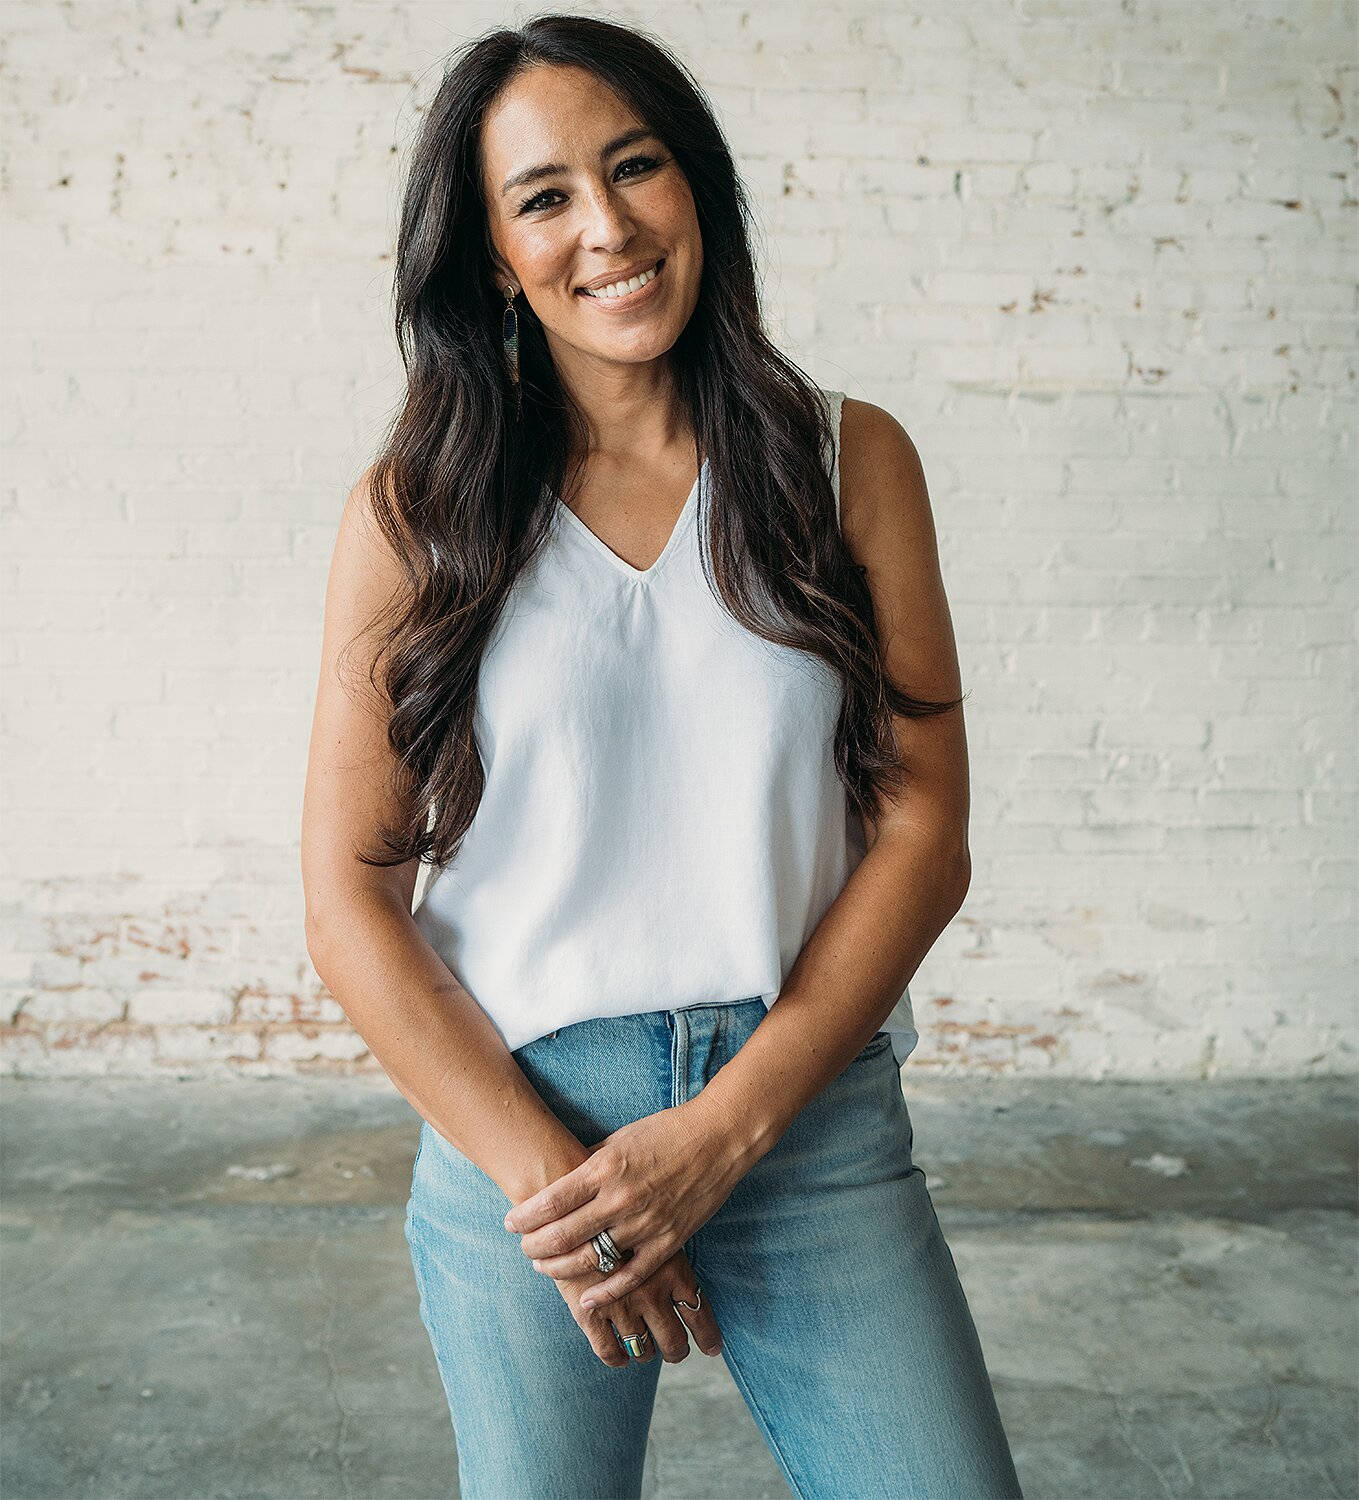 Joanna Gaines Simple Outfit Wallpaper